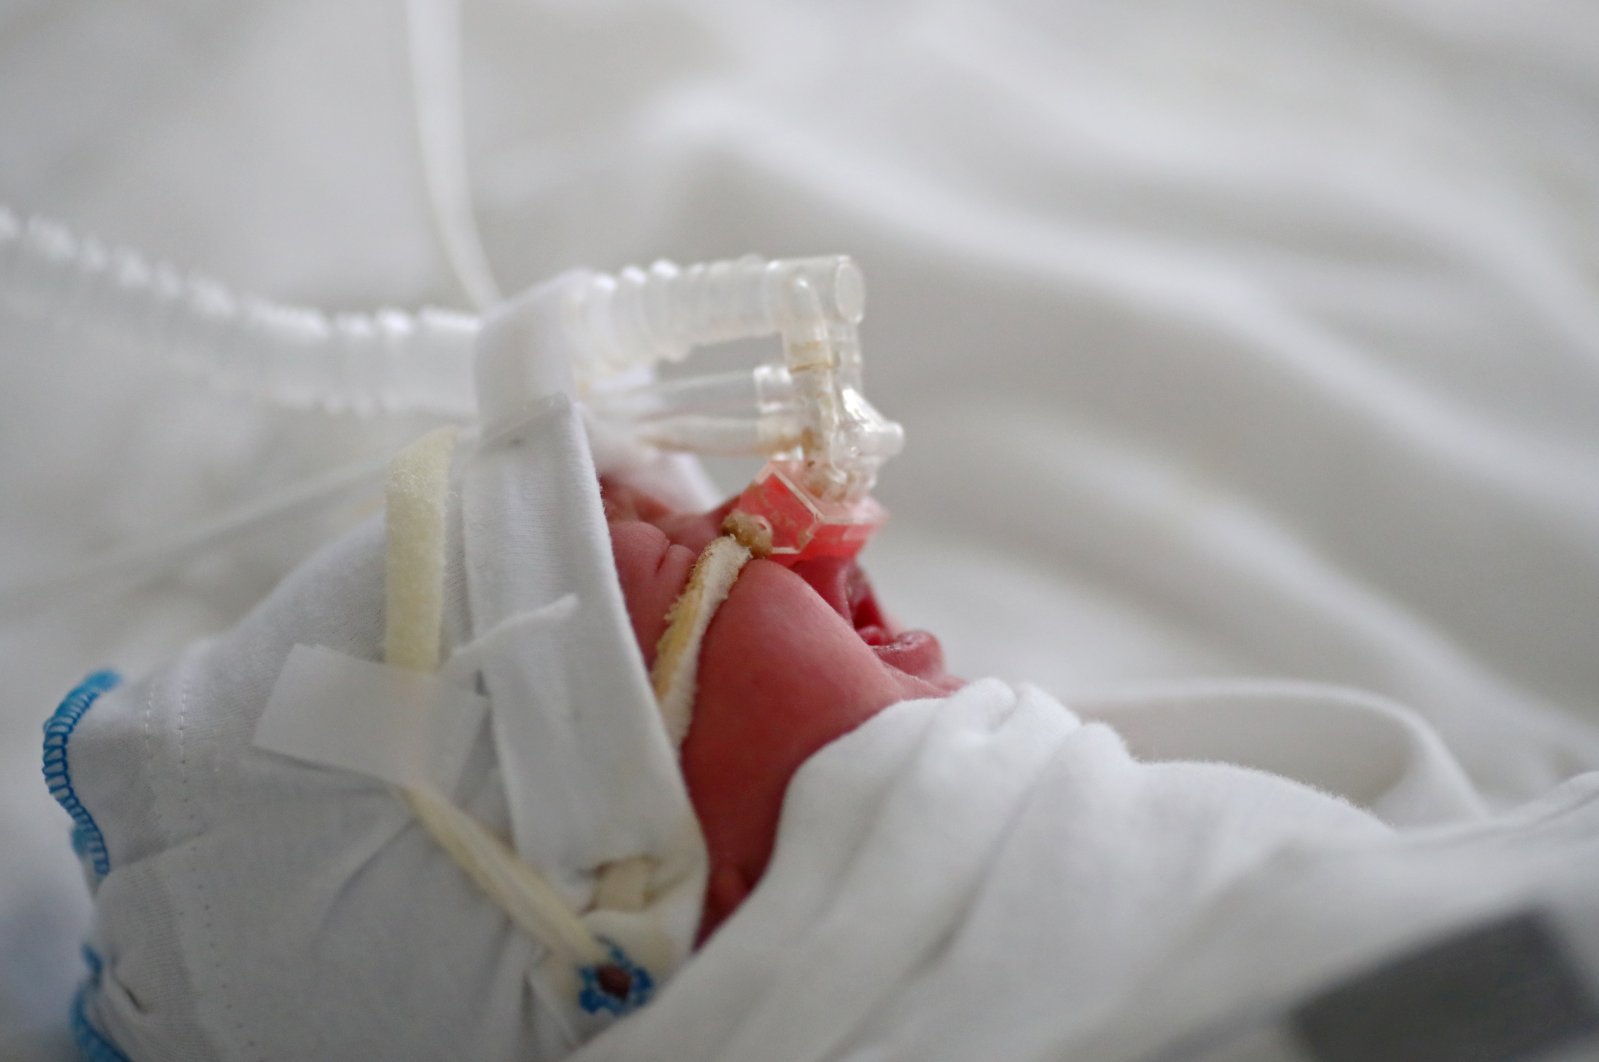 A newborn baby infected with COVID-19 receives oxygen at a maternity hospital in Volgograd, Russia, Aug. 19, 2021. (Reuters Photo)